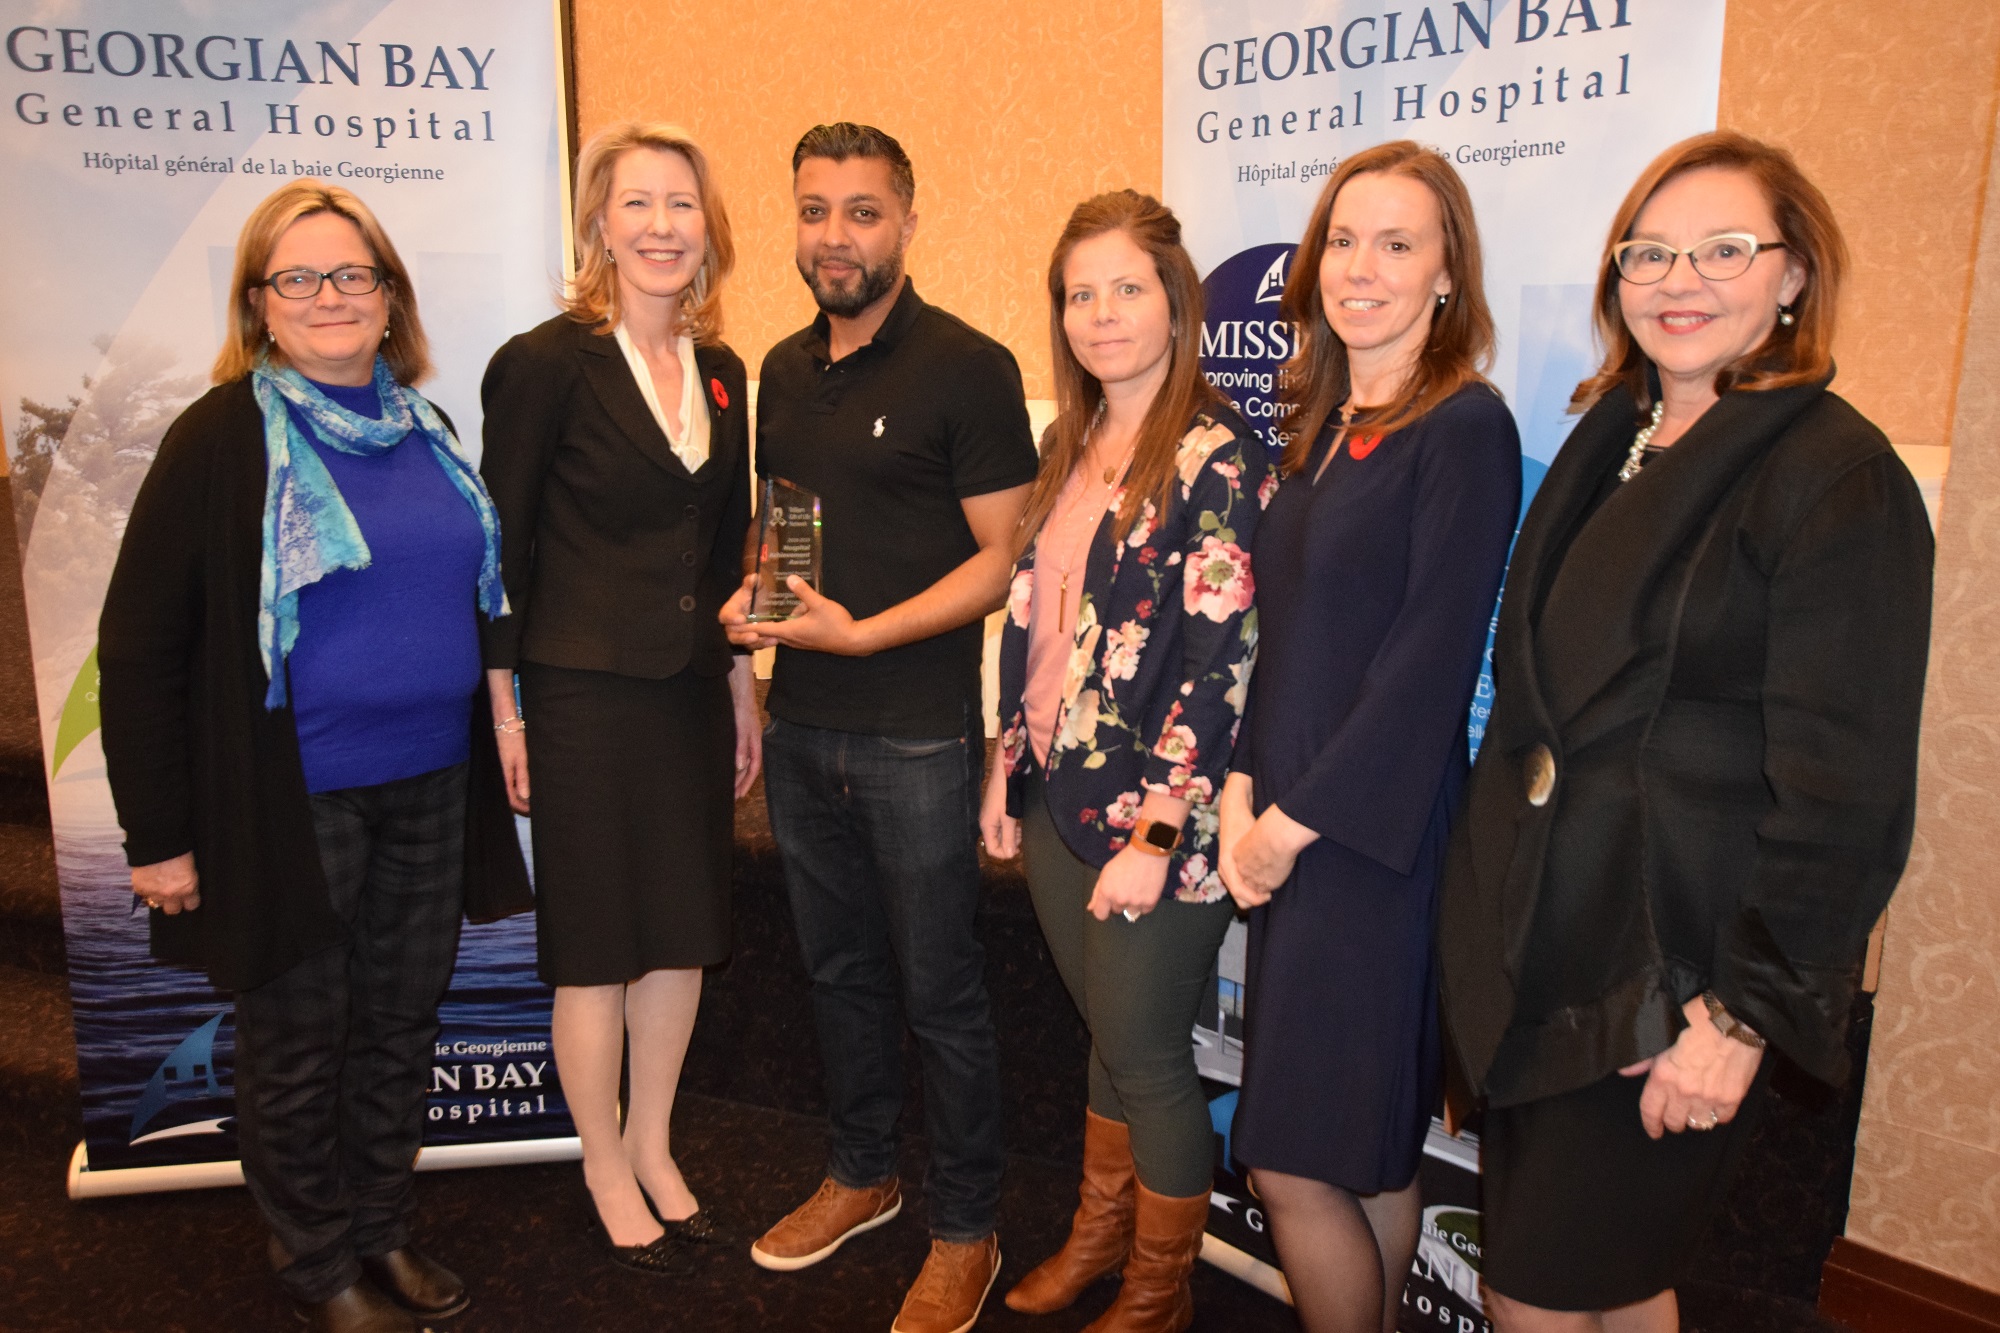 GBGH awarded for championing organ and tissue donation